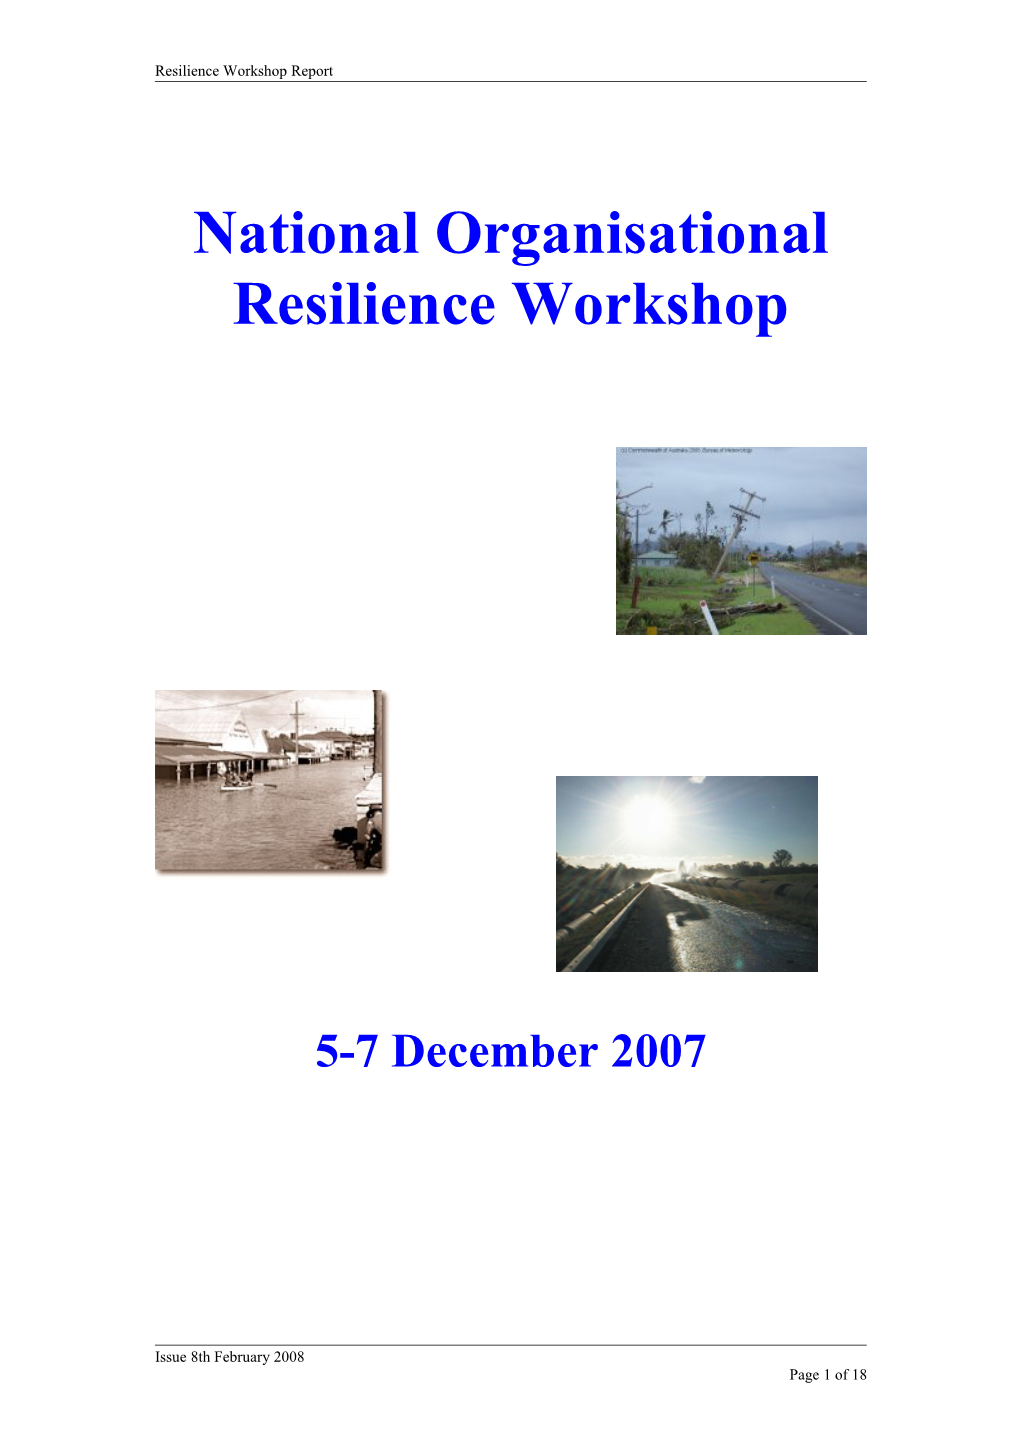 National Organisational Resilience Framework - the Outcomes DOC 492KB